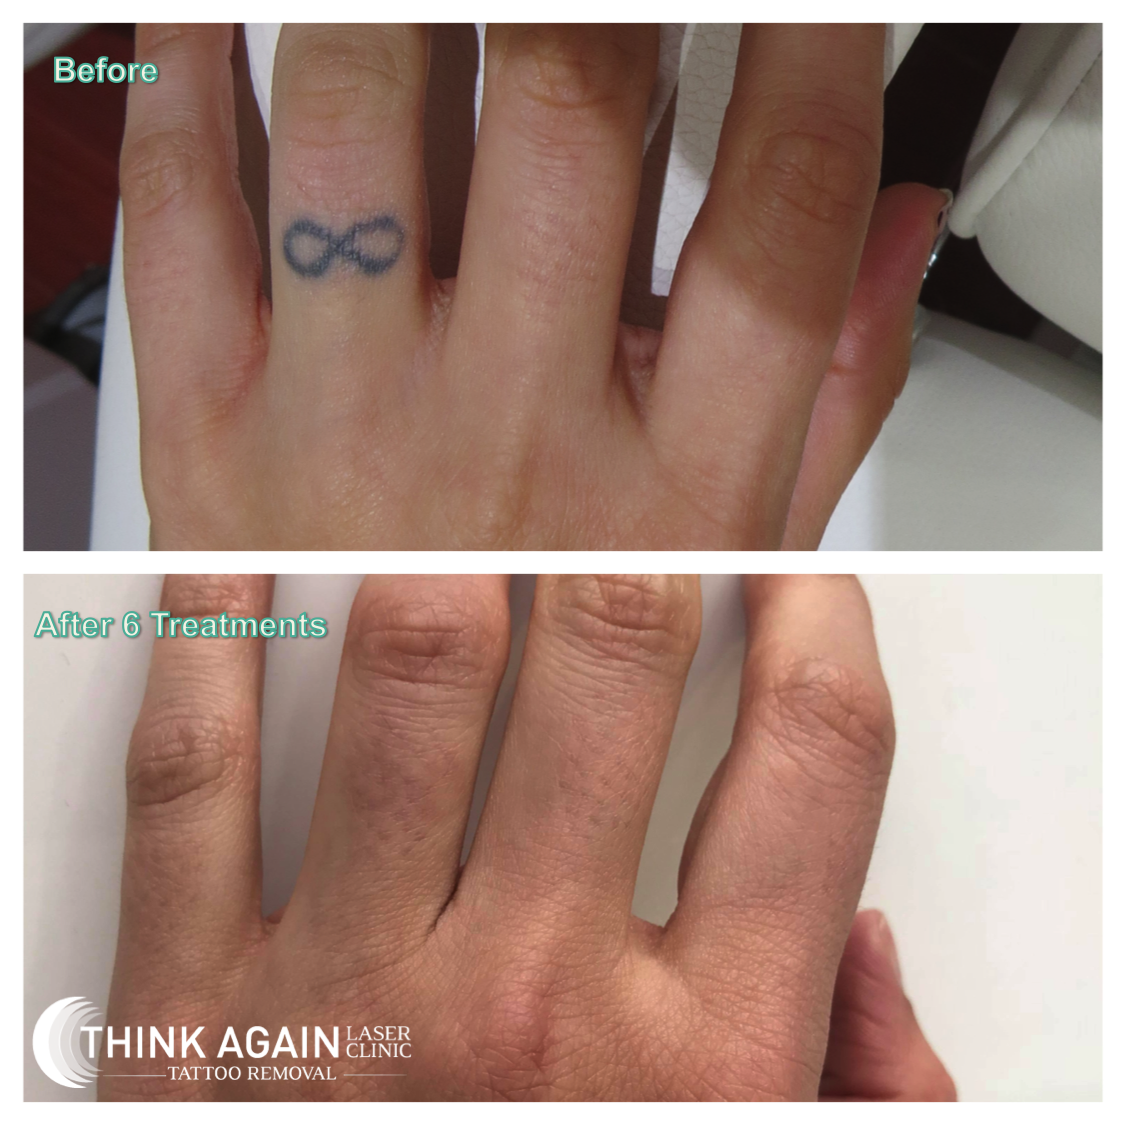 Tattoo Removal Before and After Photos | Goodbye Tattoos